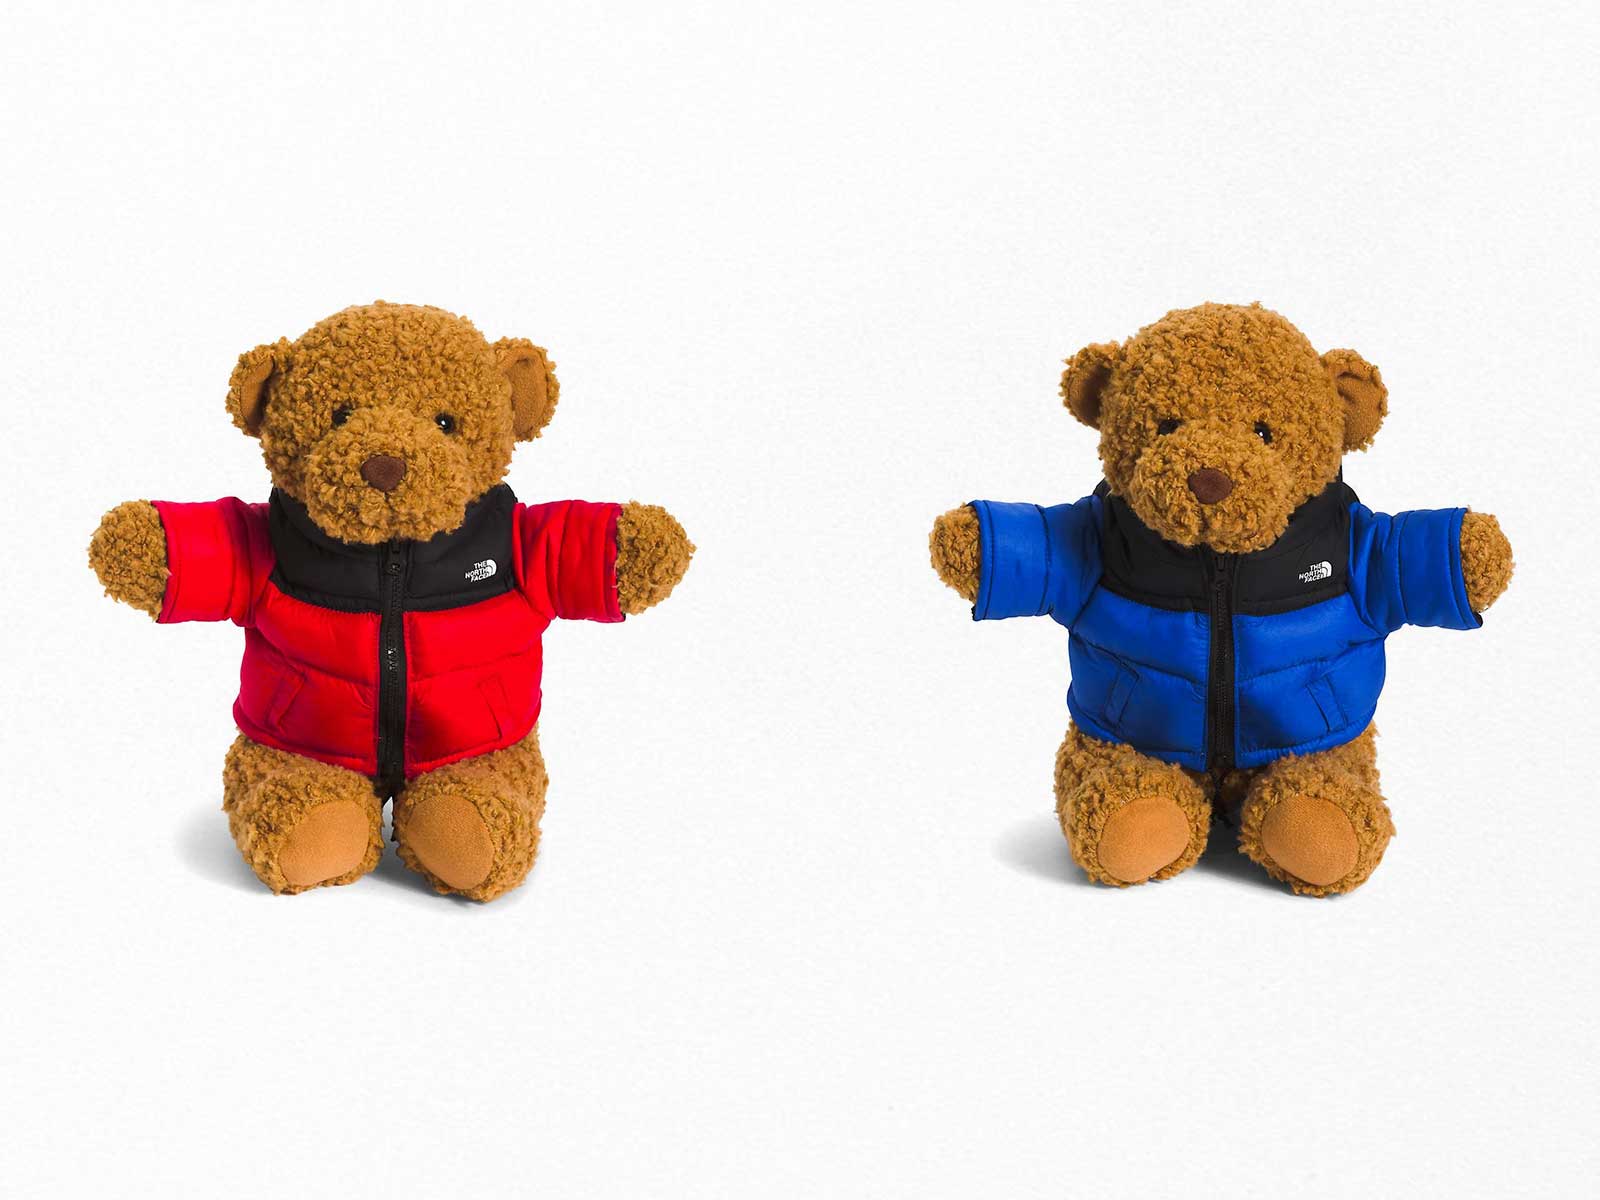 The North Face commemorates 30th anniversary of its Nuptse jacket with two teddy bears